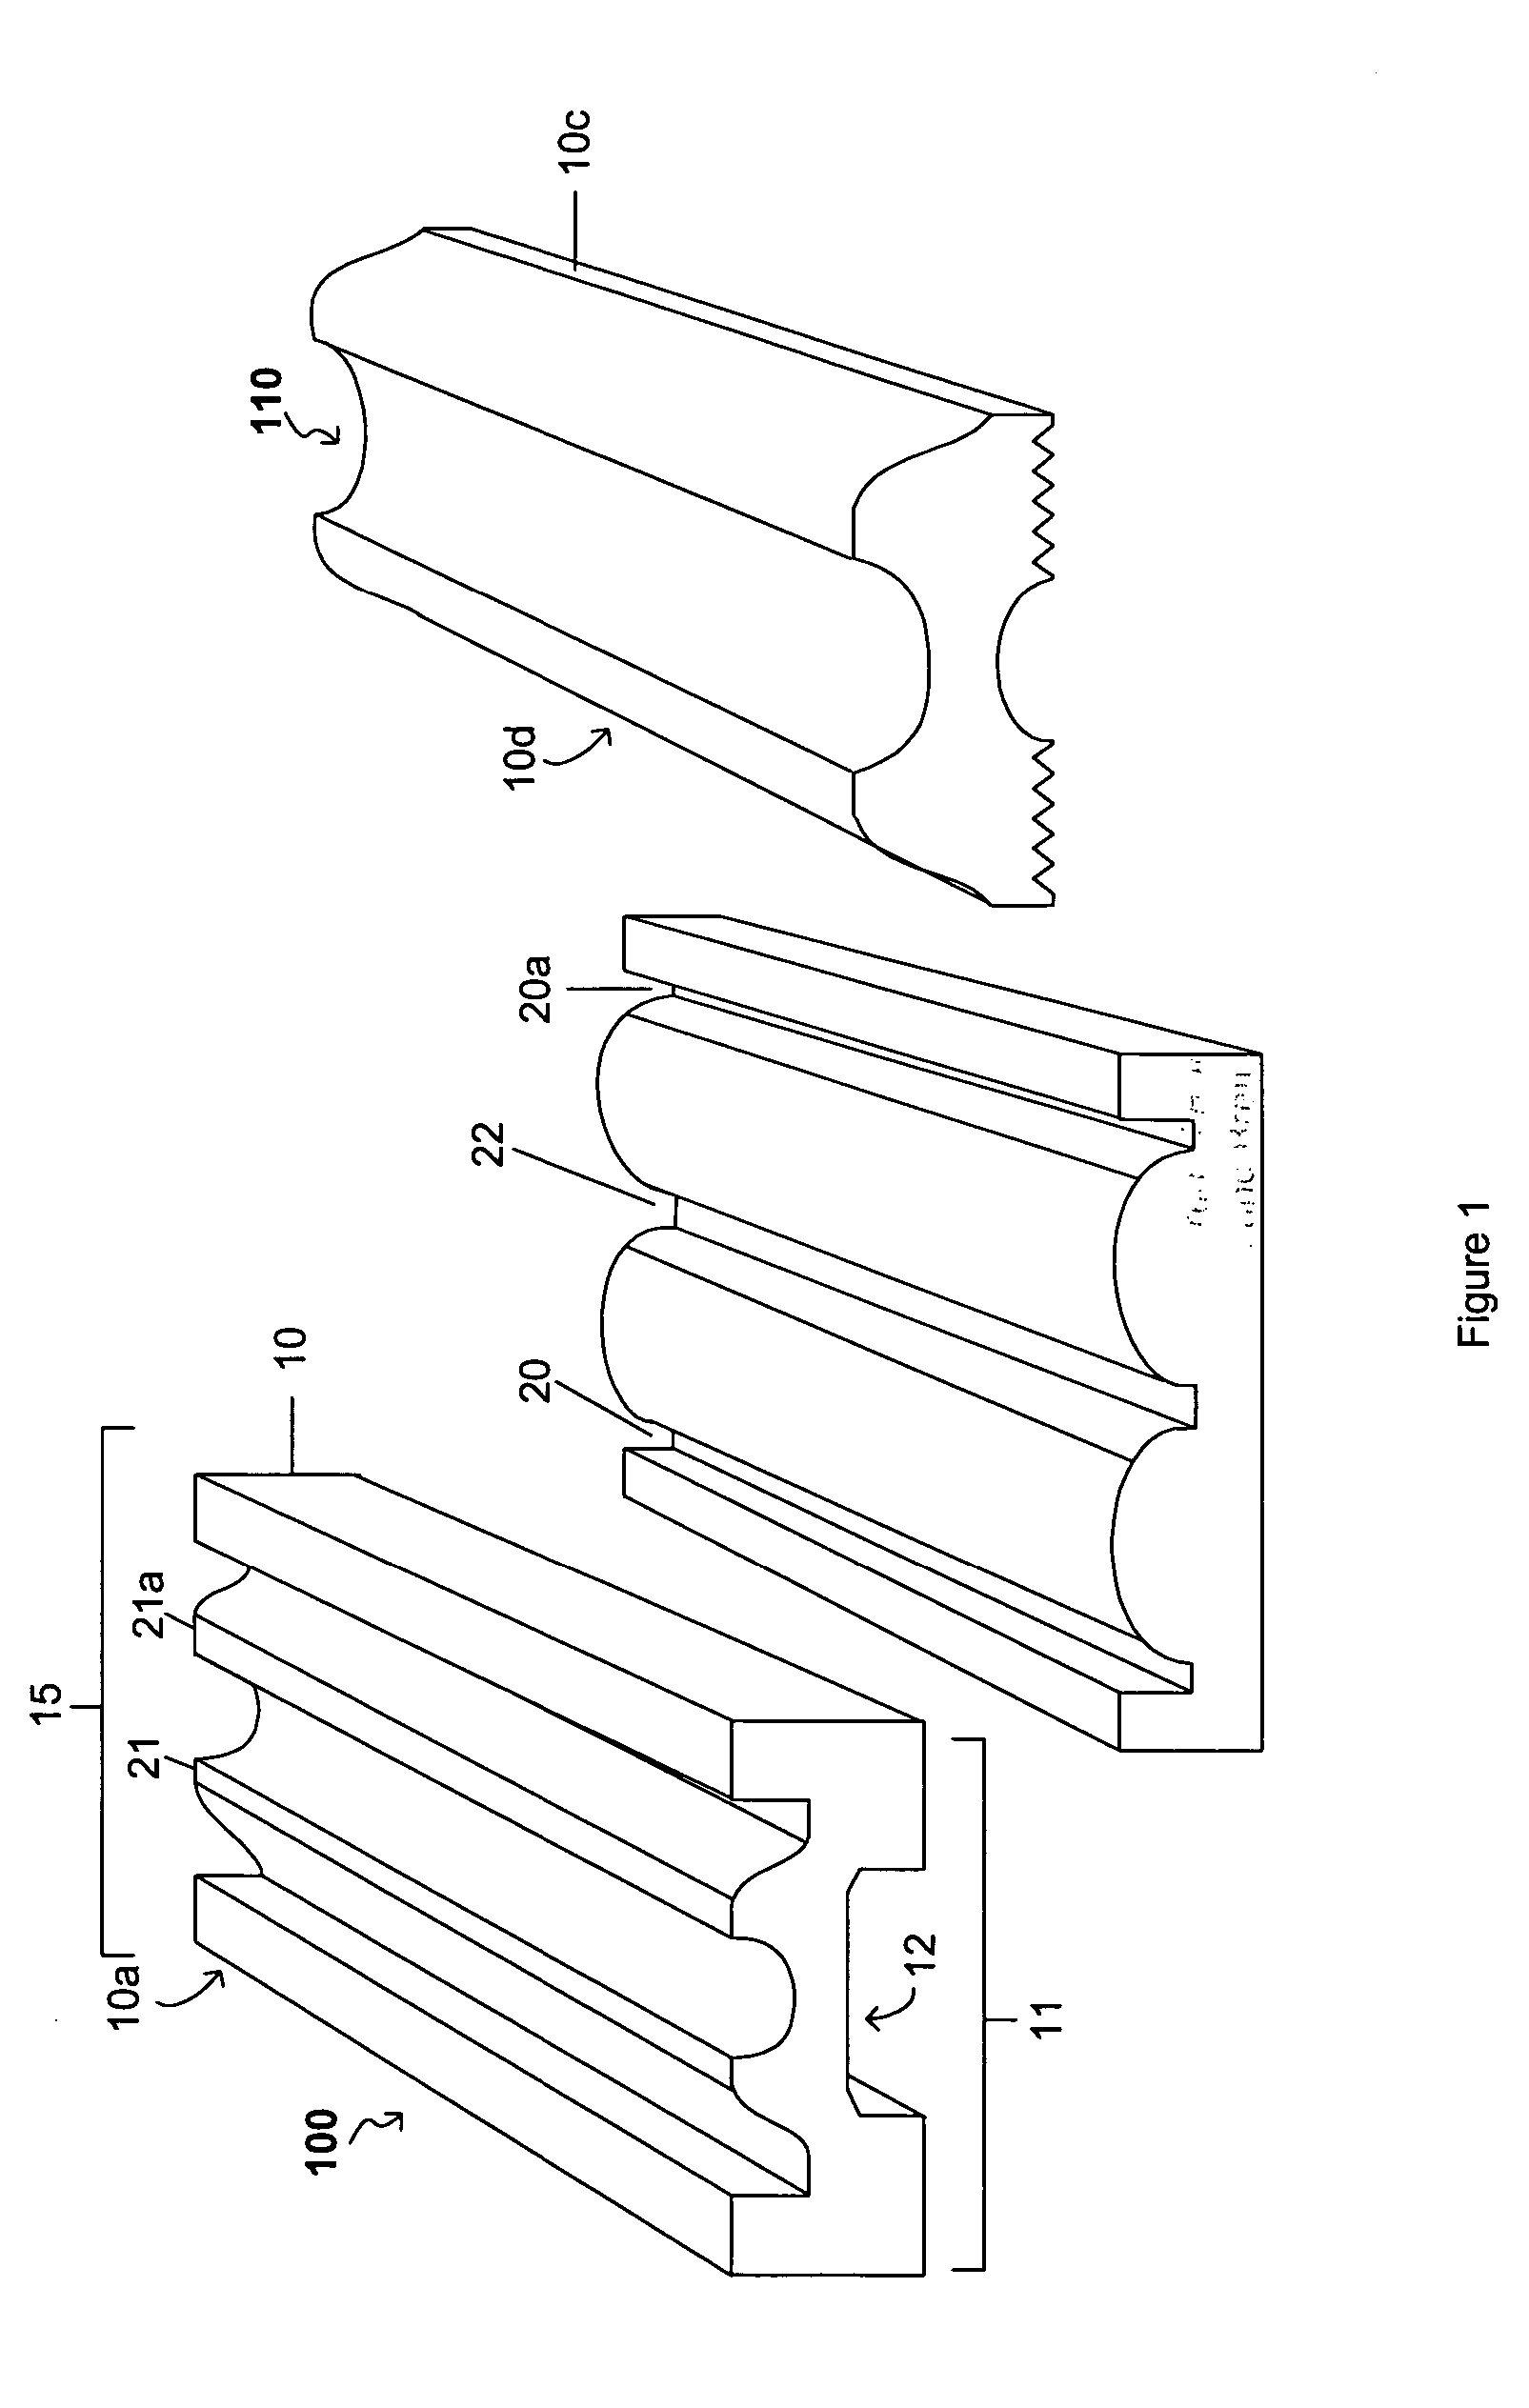 Extruded railroad tie for use with steel tie